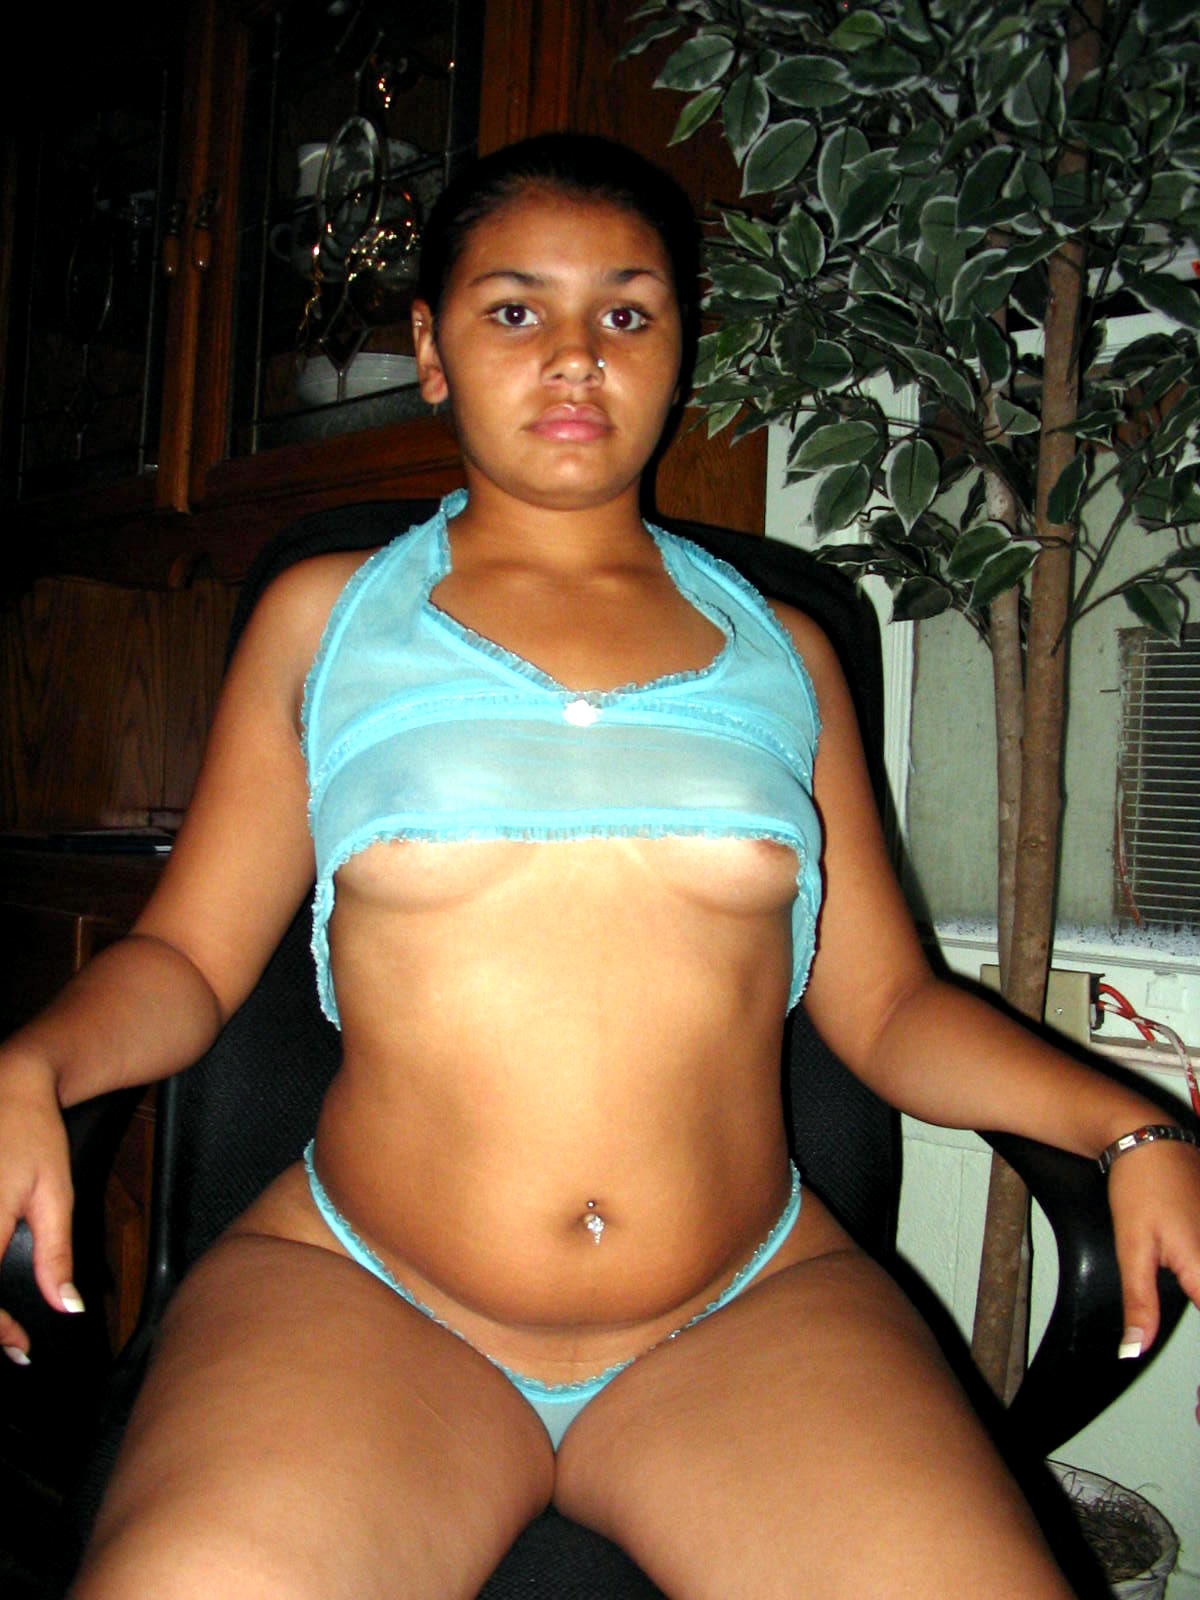 Shaved Ebony Babes - Plump ebony teen with shaved beaver, big porn picture #5.